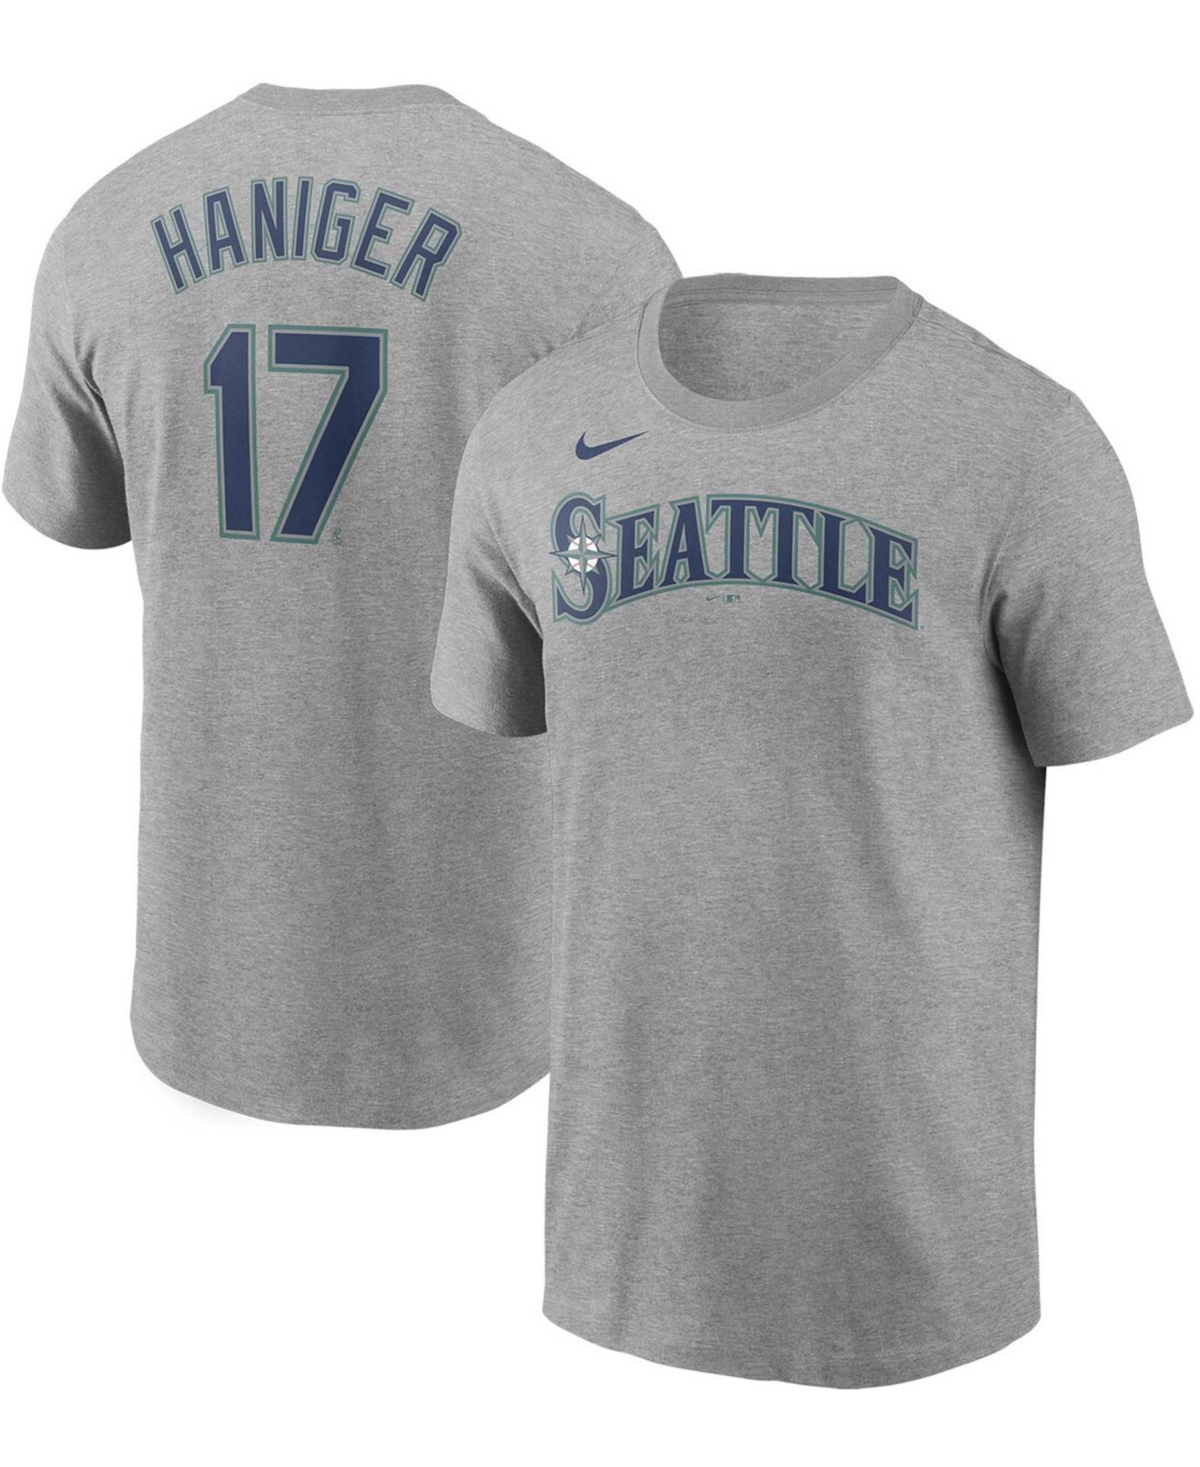 Men's Mitch Haniger Gray Seattle Mariners Name Number T-shirt